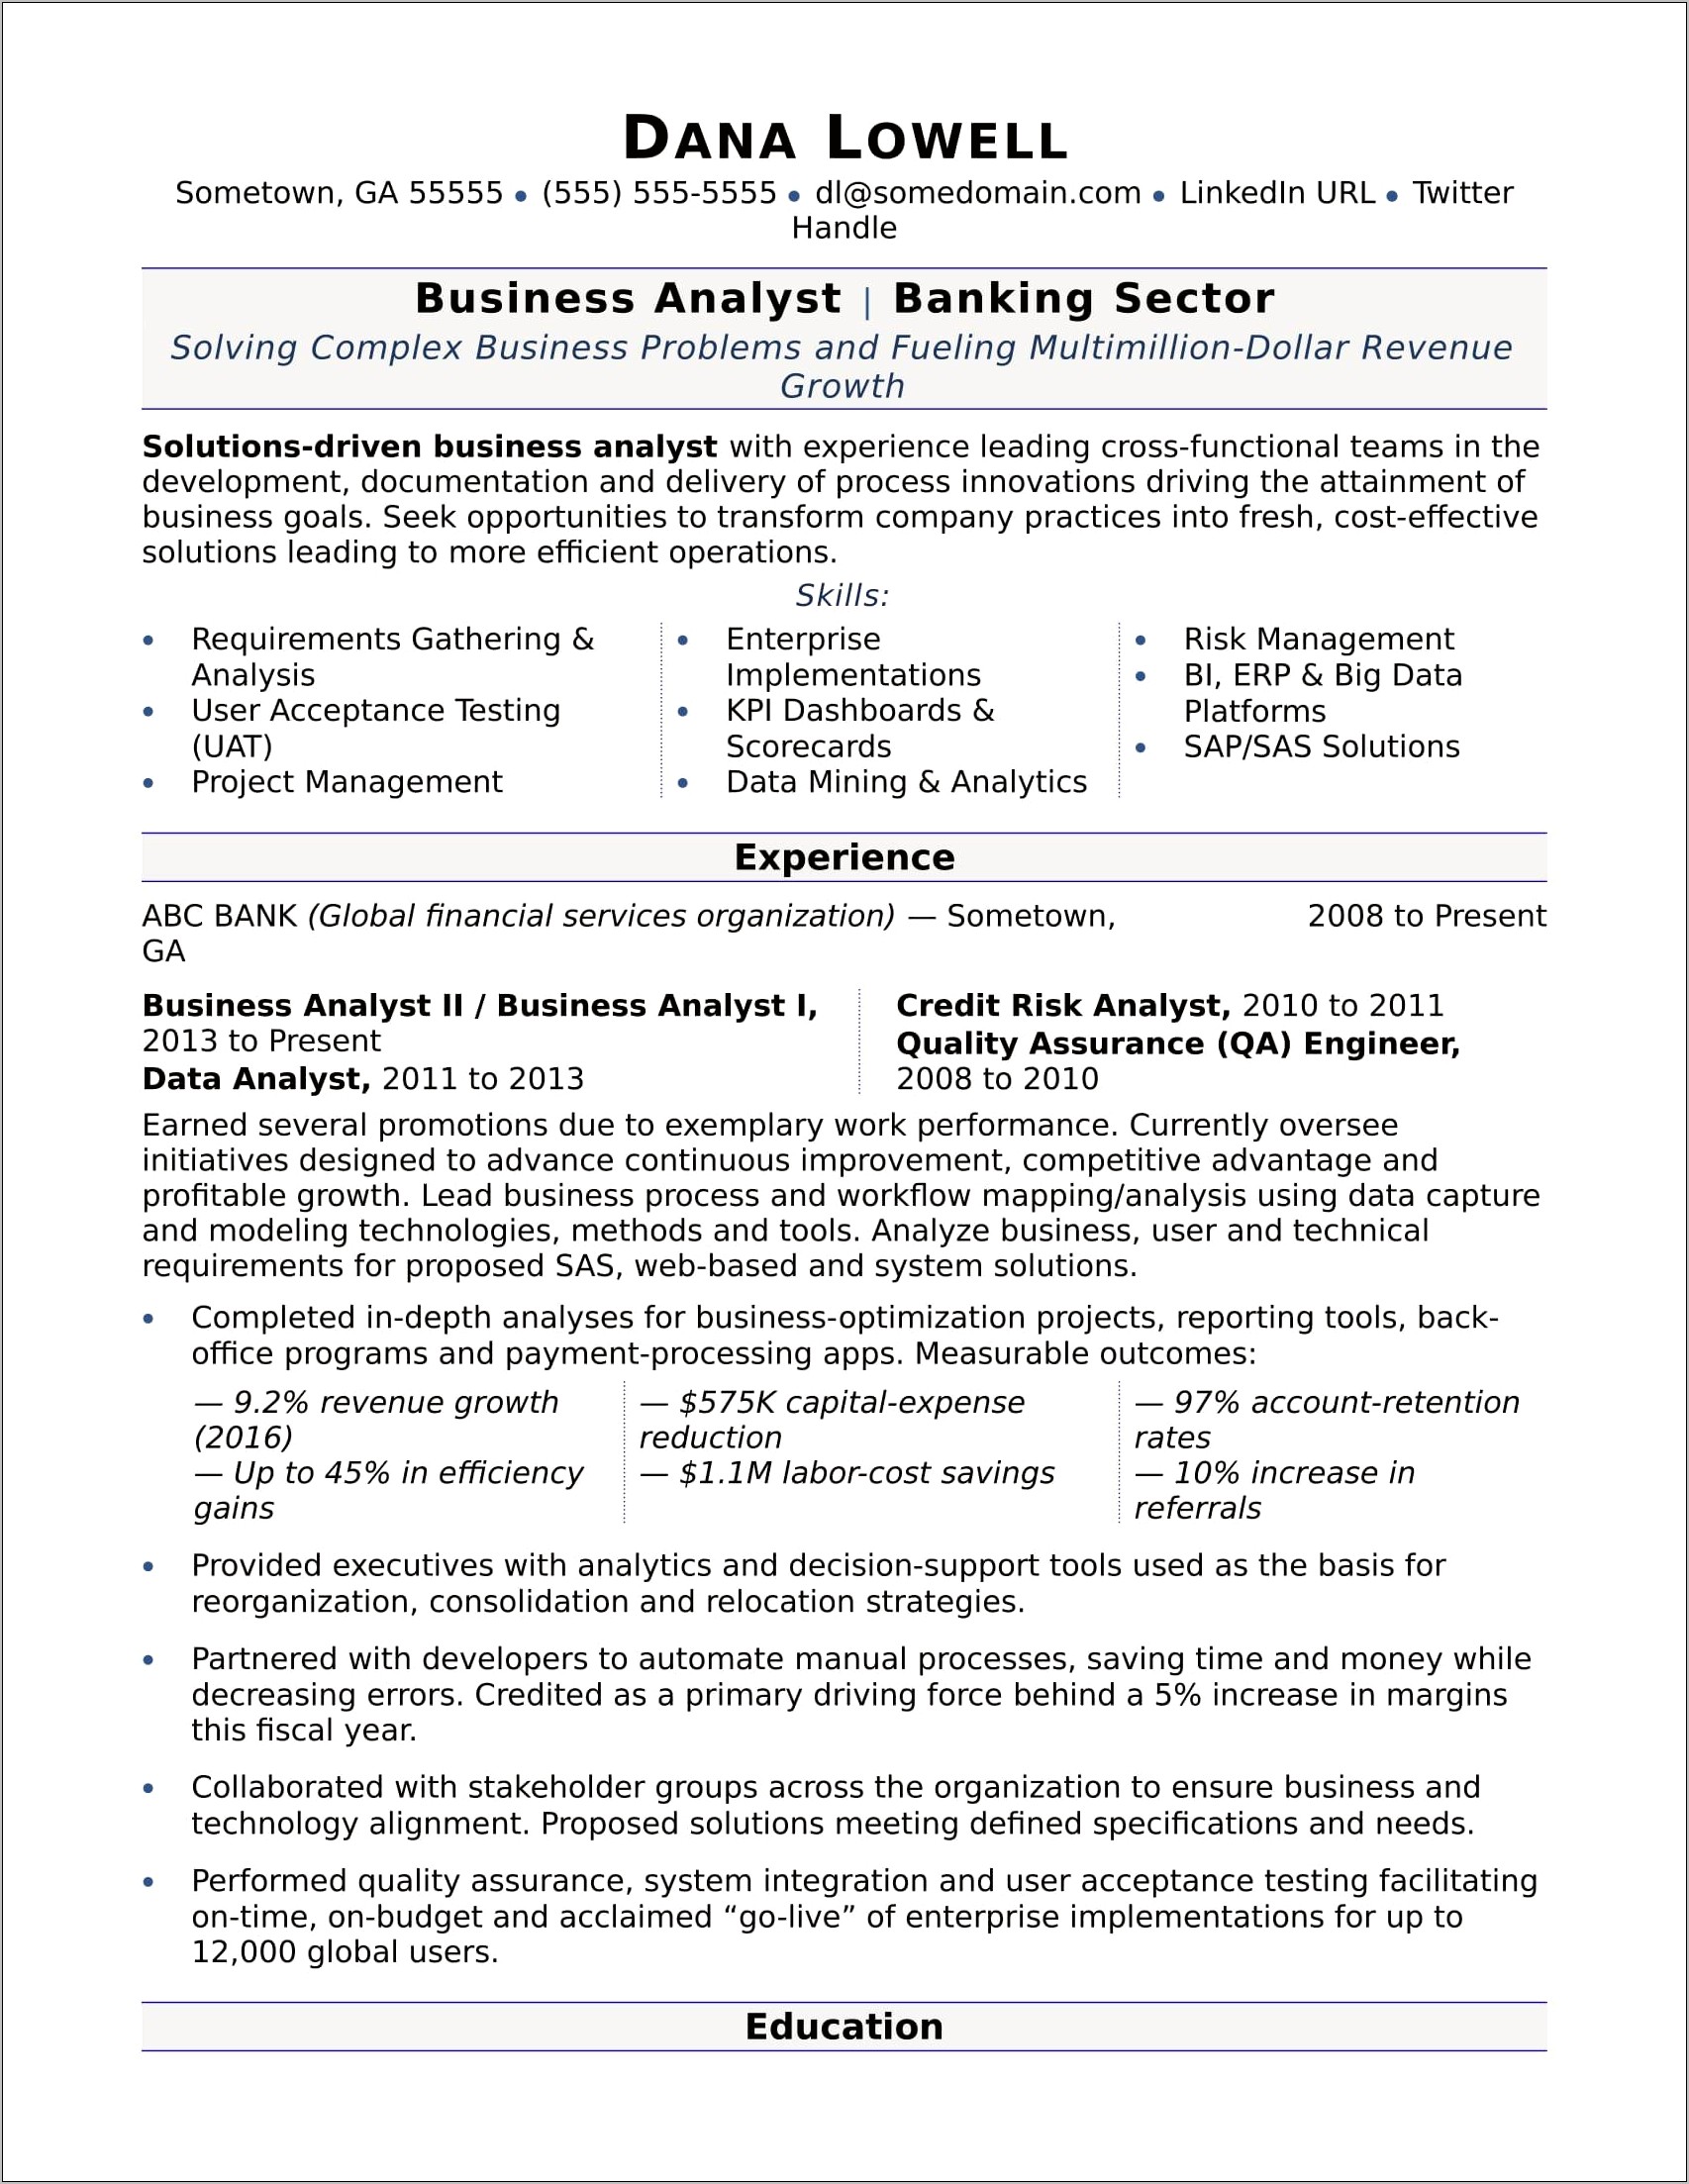 Business Analysis Position Resume Example